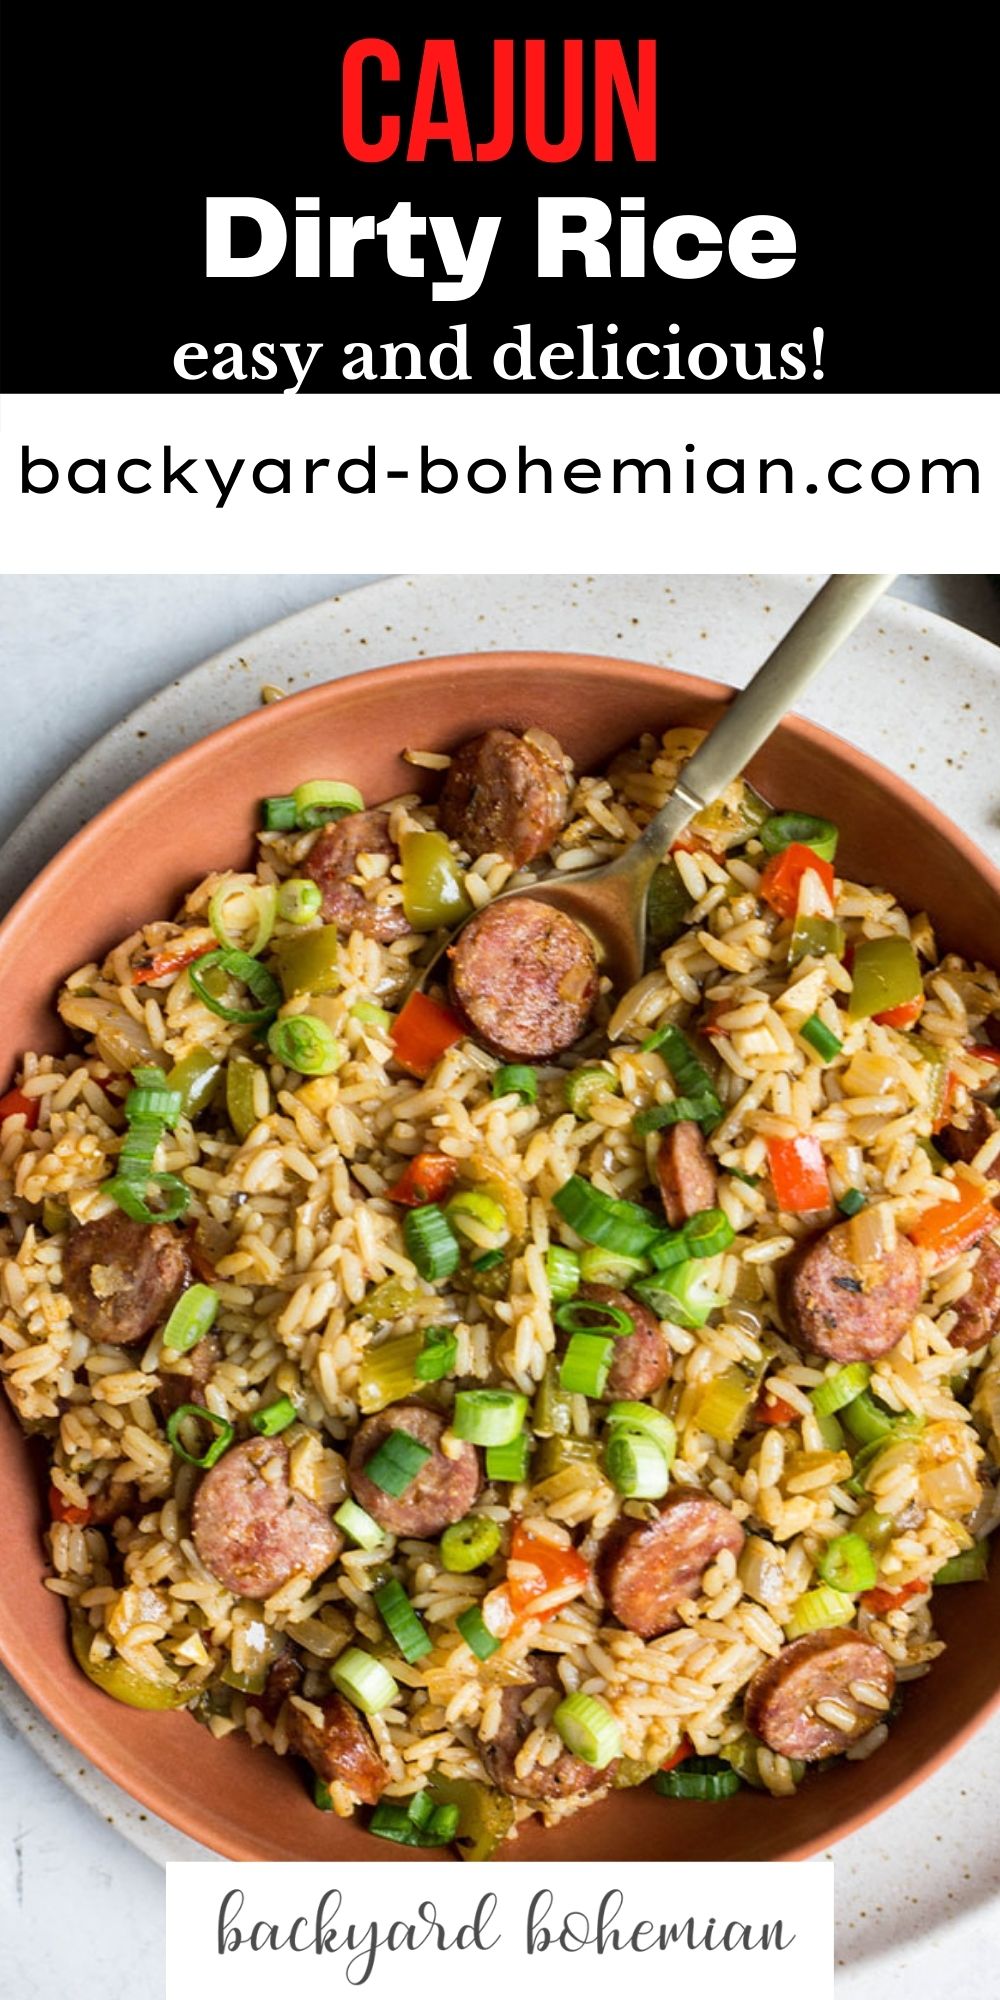 New Orleans Cajun Dirty Rice is made with Cajun sausage, white rice, bell peppers and features a spicy seasoning blend. This traditional Cajun rice dish is hearty, easy to make, and inexpensive!